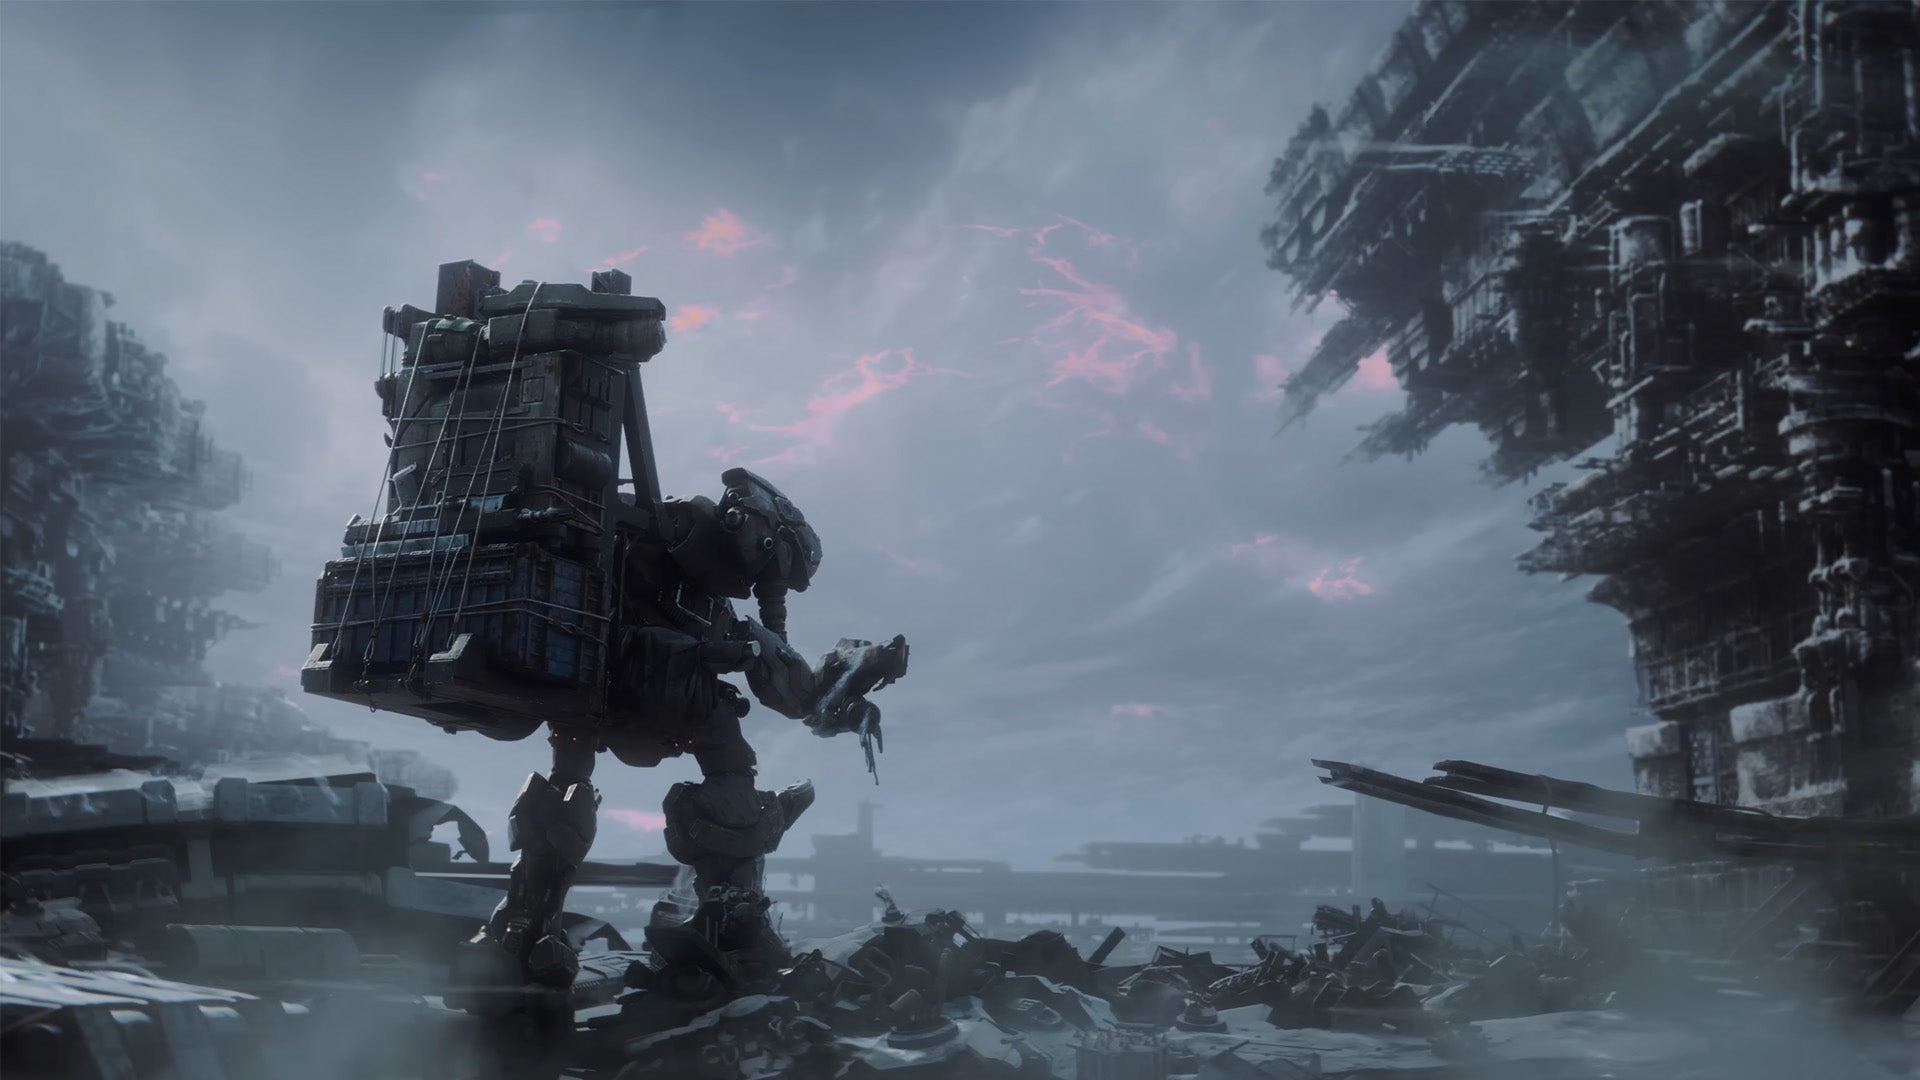 Armored Core 6 is all about customising your mech and fighting bosses